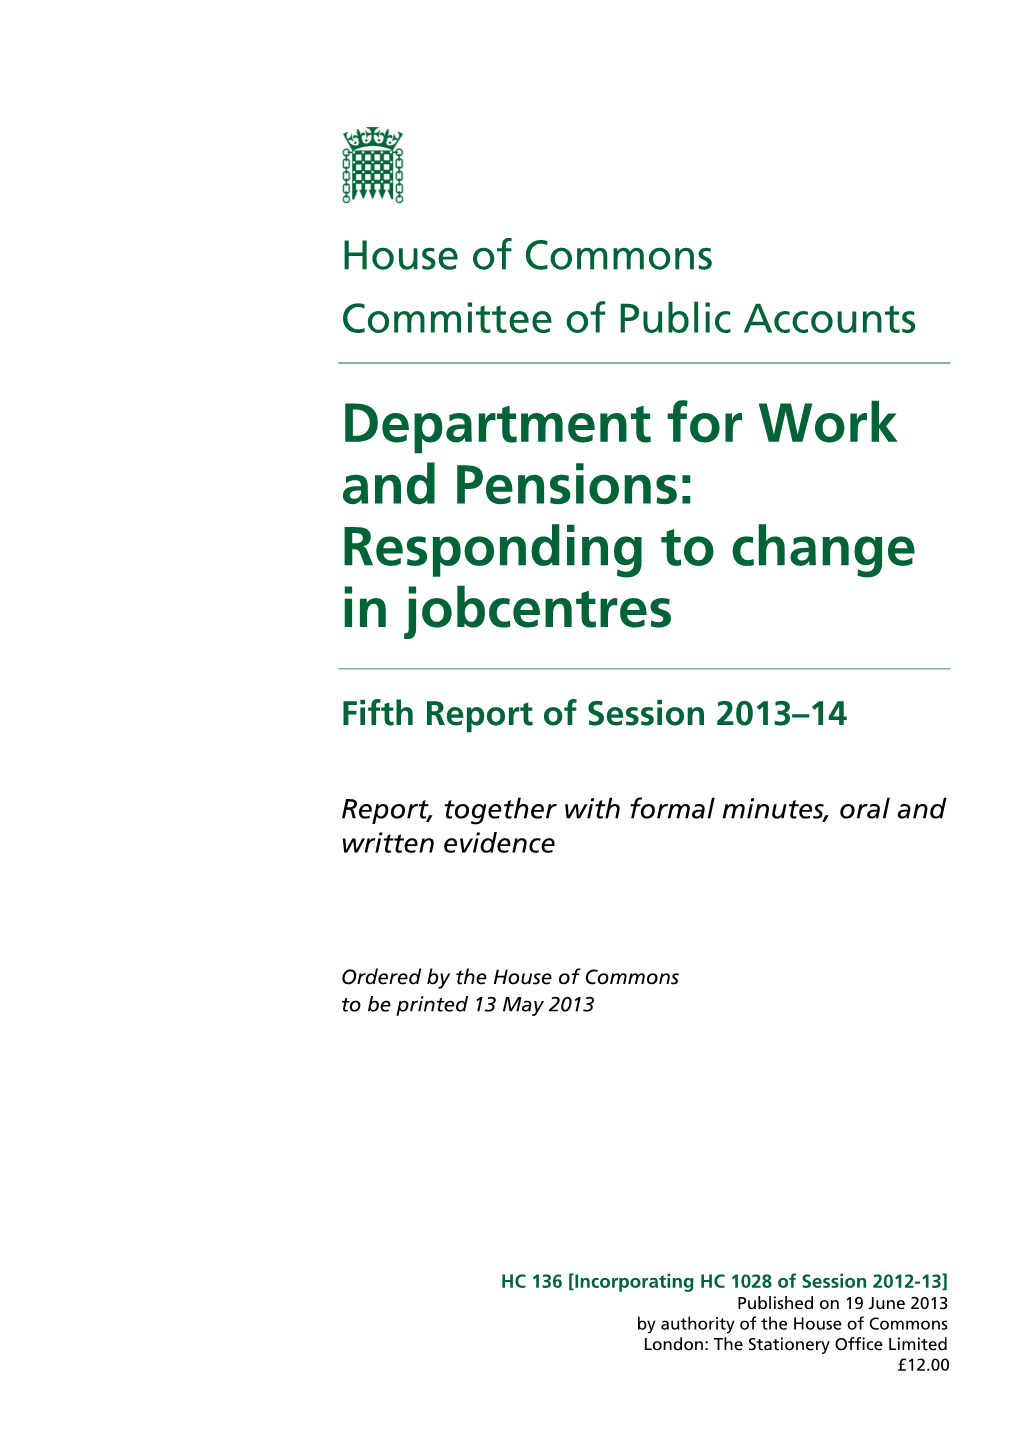 Department for Work and Pensions: Responding to Change in Jobcentres